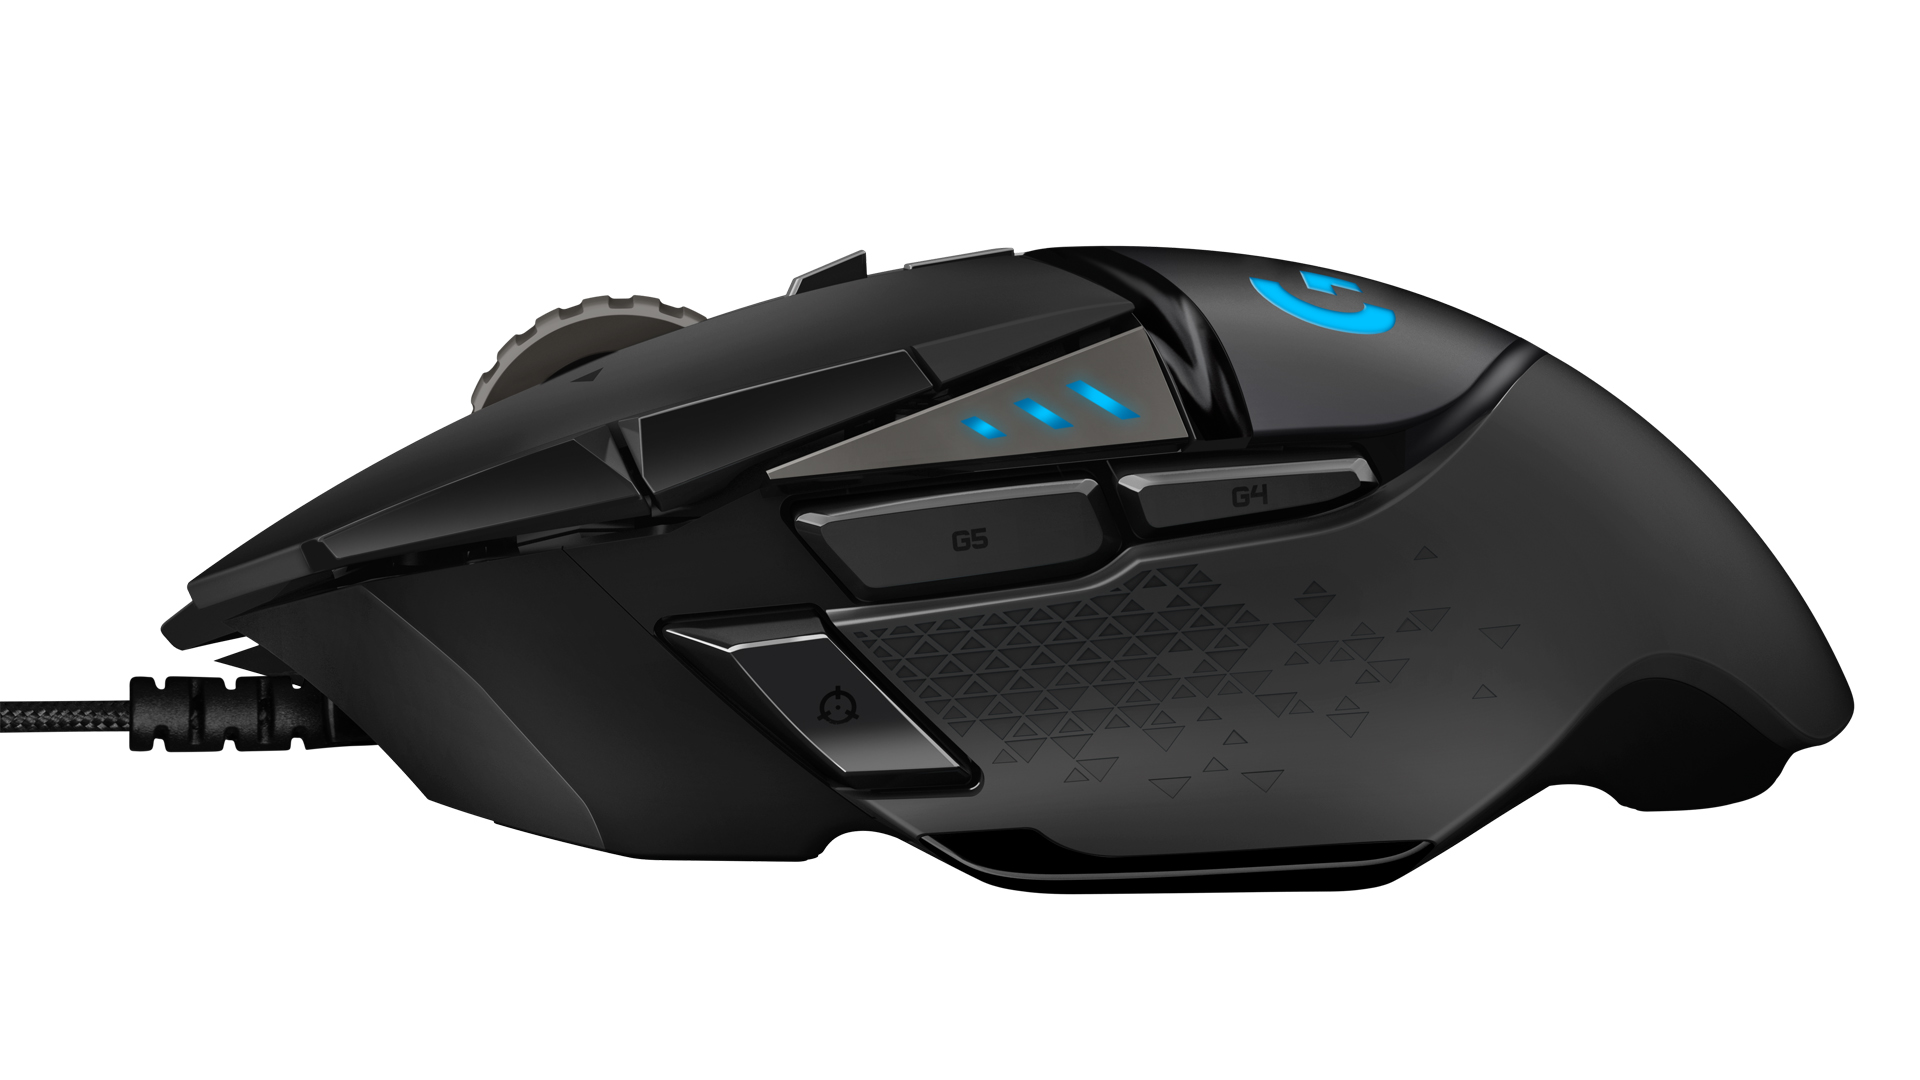 The Logitech G502 Hero gaming mouse is up to 53% cheaper